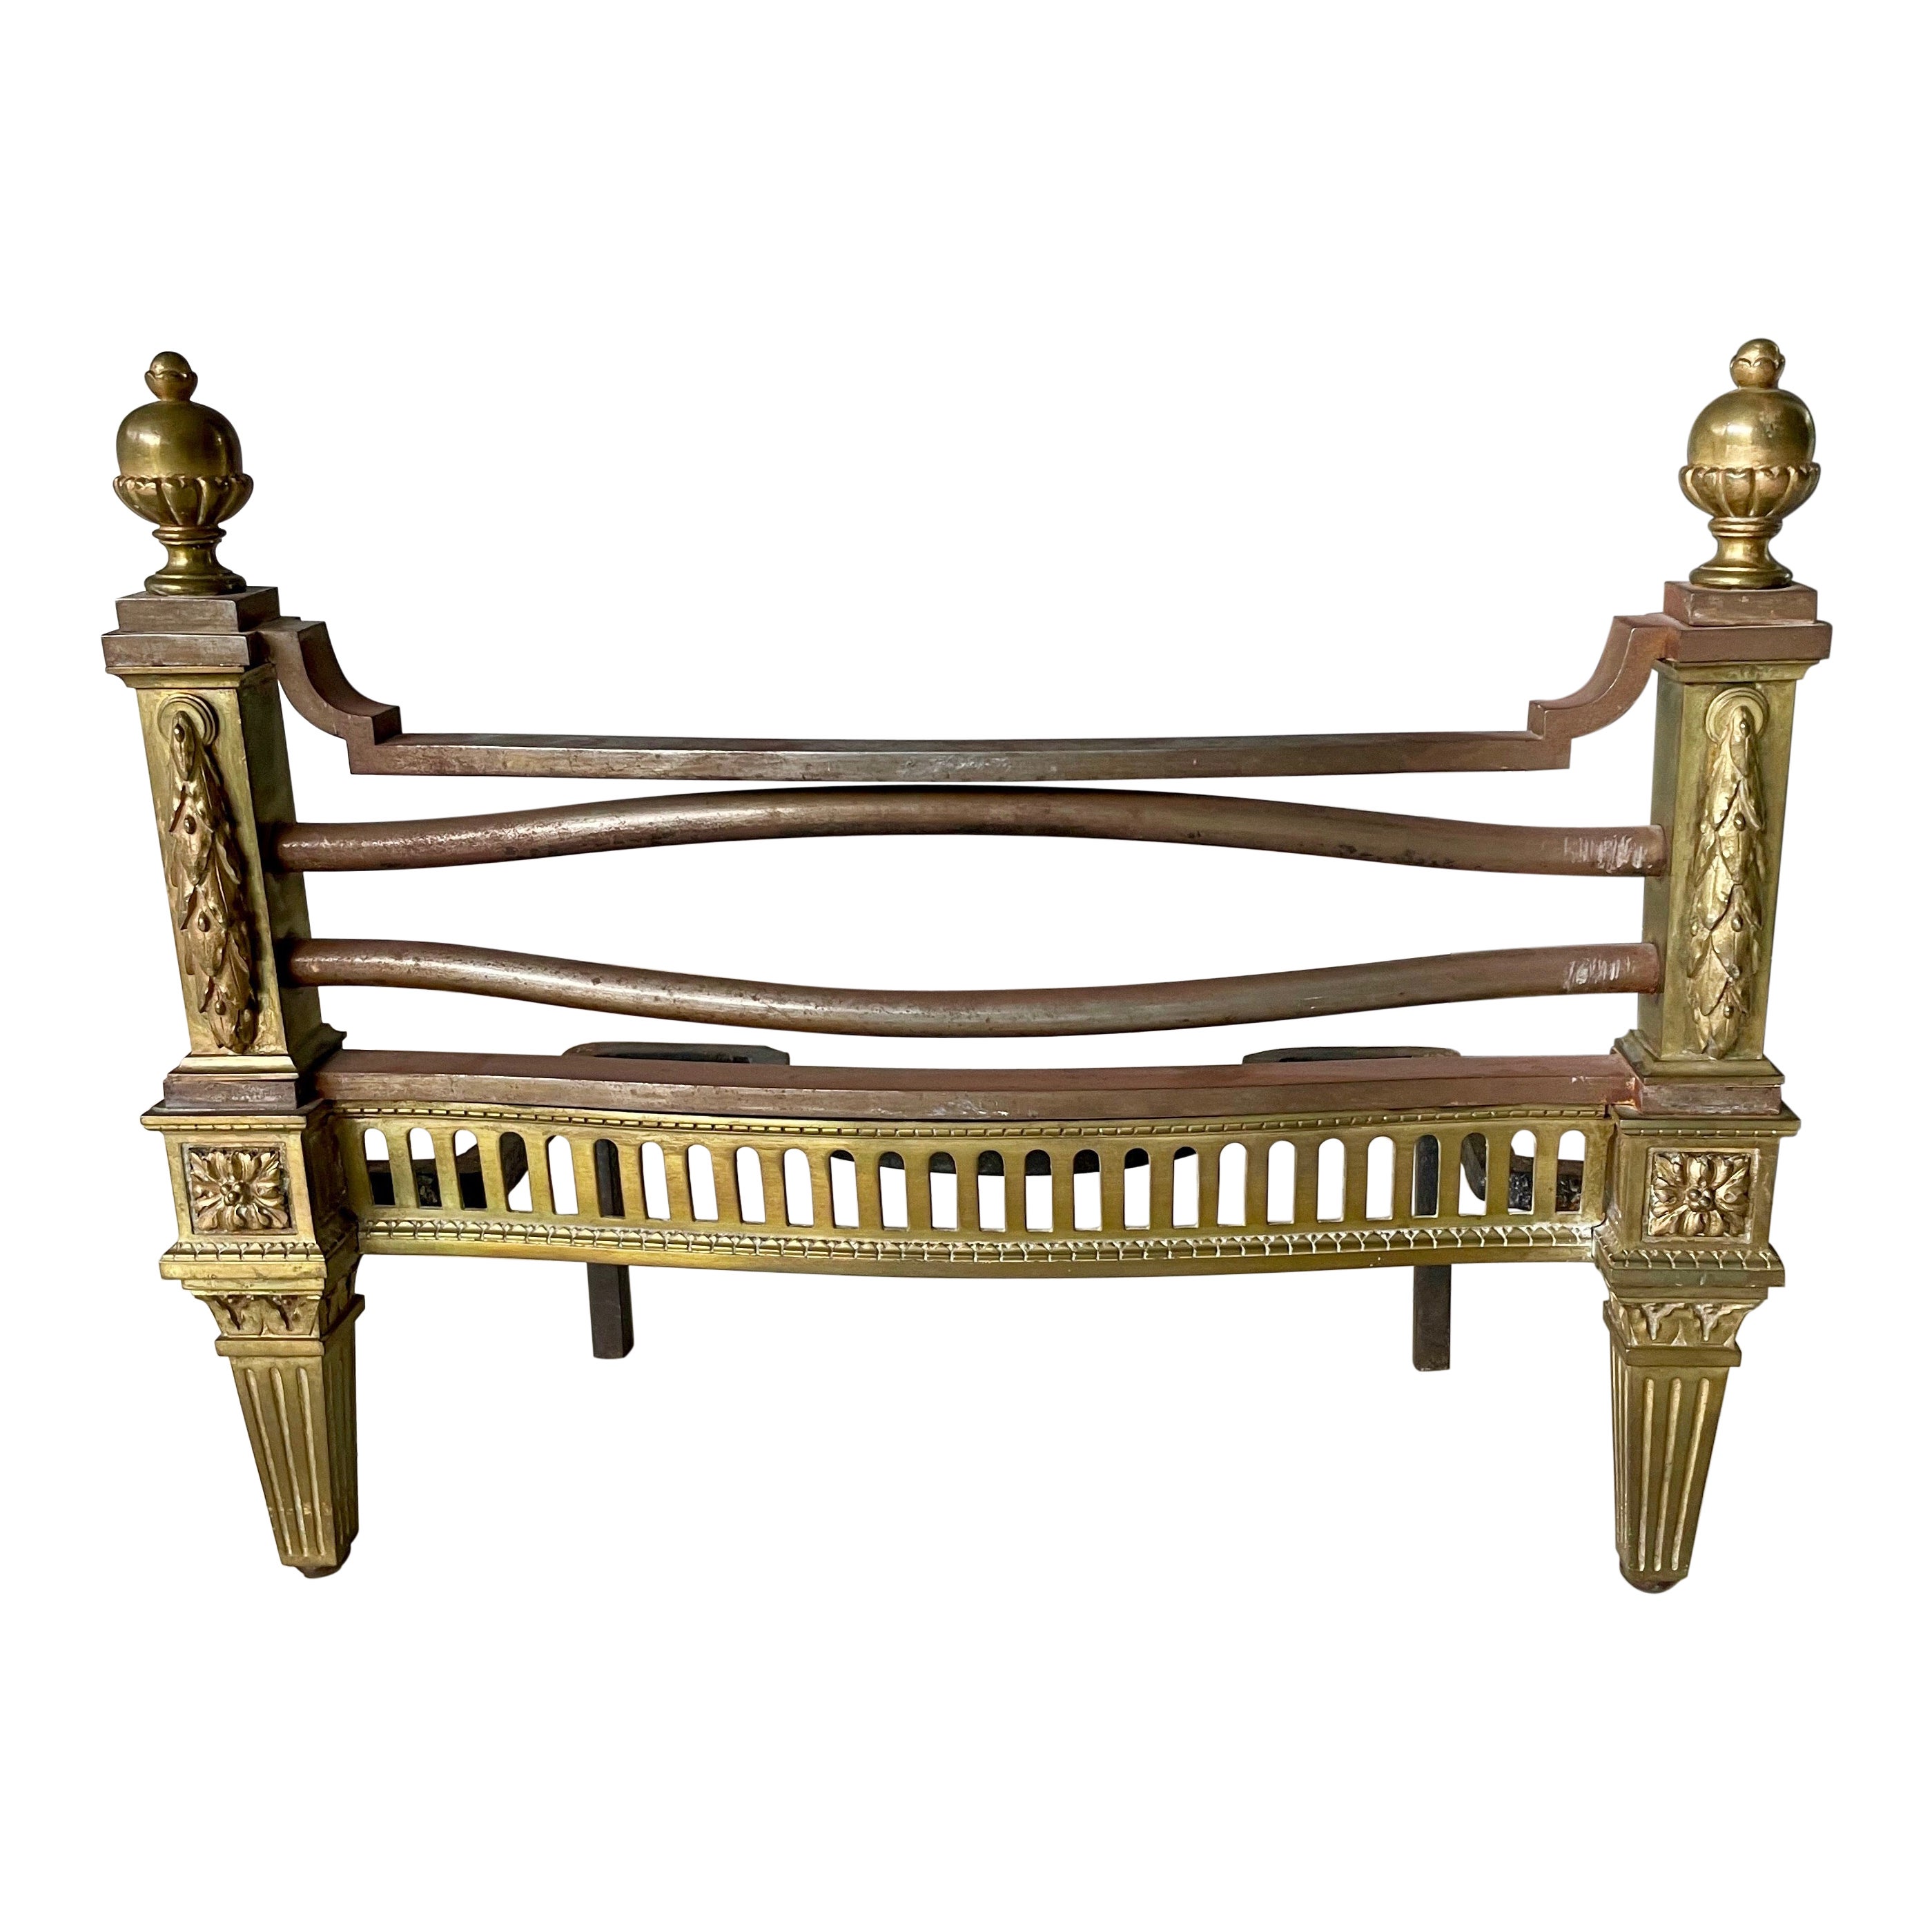 Elegant Mid-19th Century Stamped Gilt Bronze Andirons, France, Around 1850 For Sale